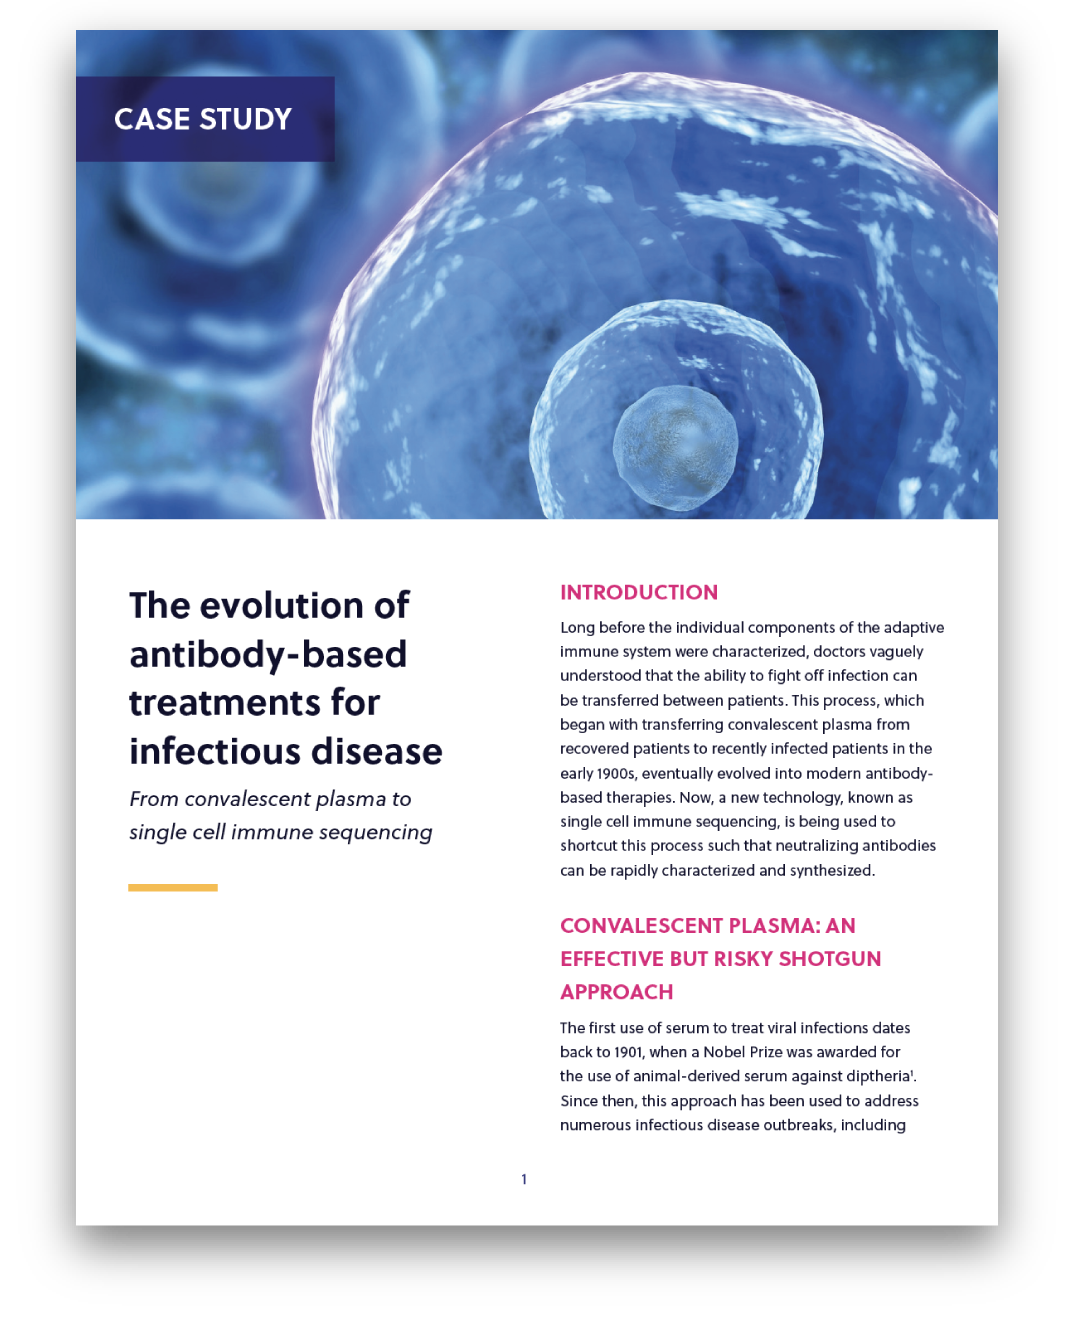 Case Study thumbnail: The evolution of antibody-based treatments for infectious disease, from convalescent plasma to single cell immune sequencing